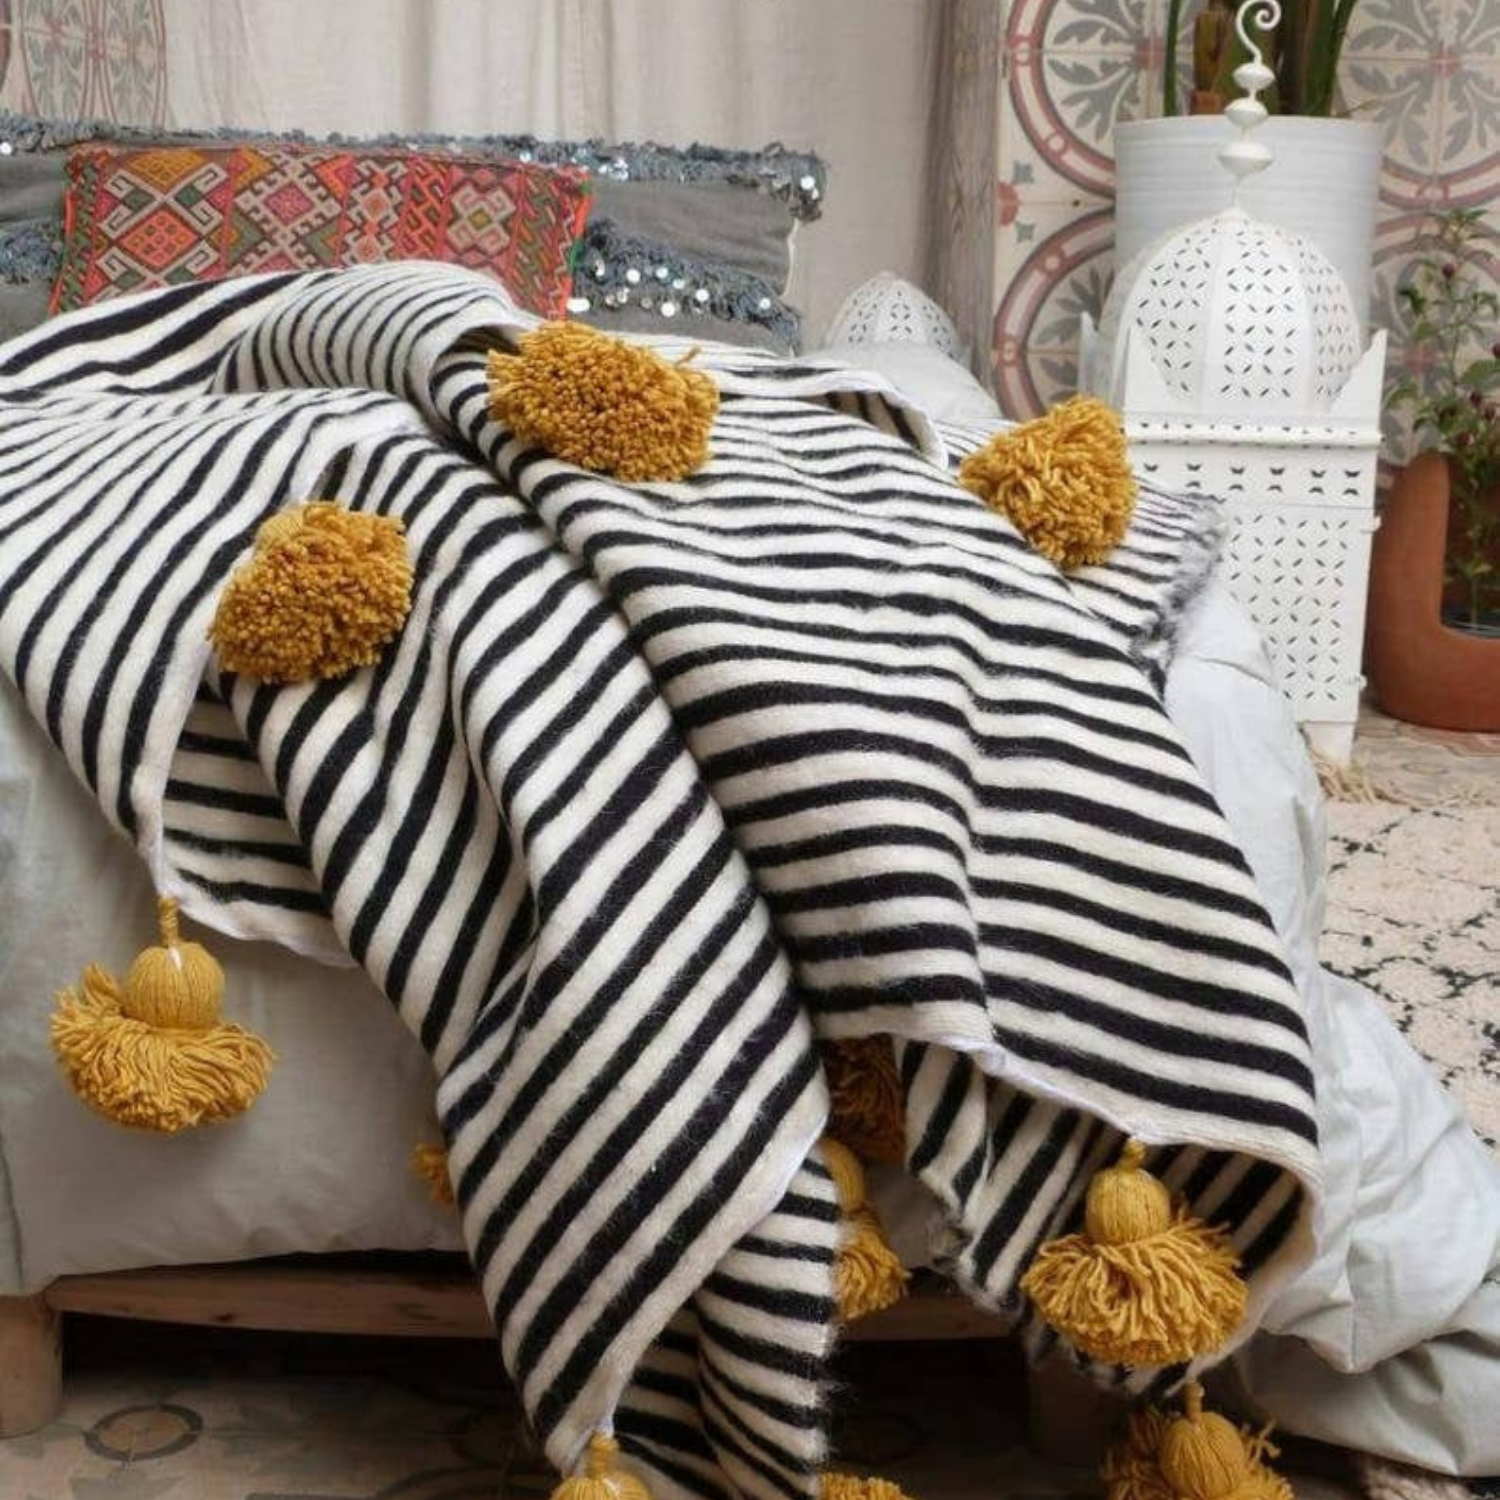 Handmade Wool Moroccan Blanket with Pompoms - Bedroom and Sofa Throw Blanket